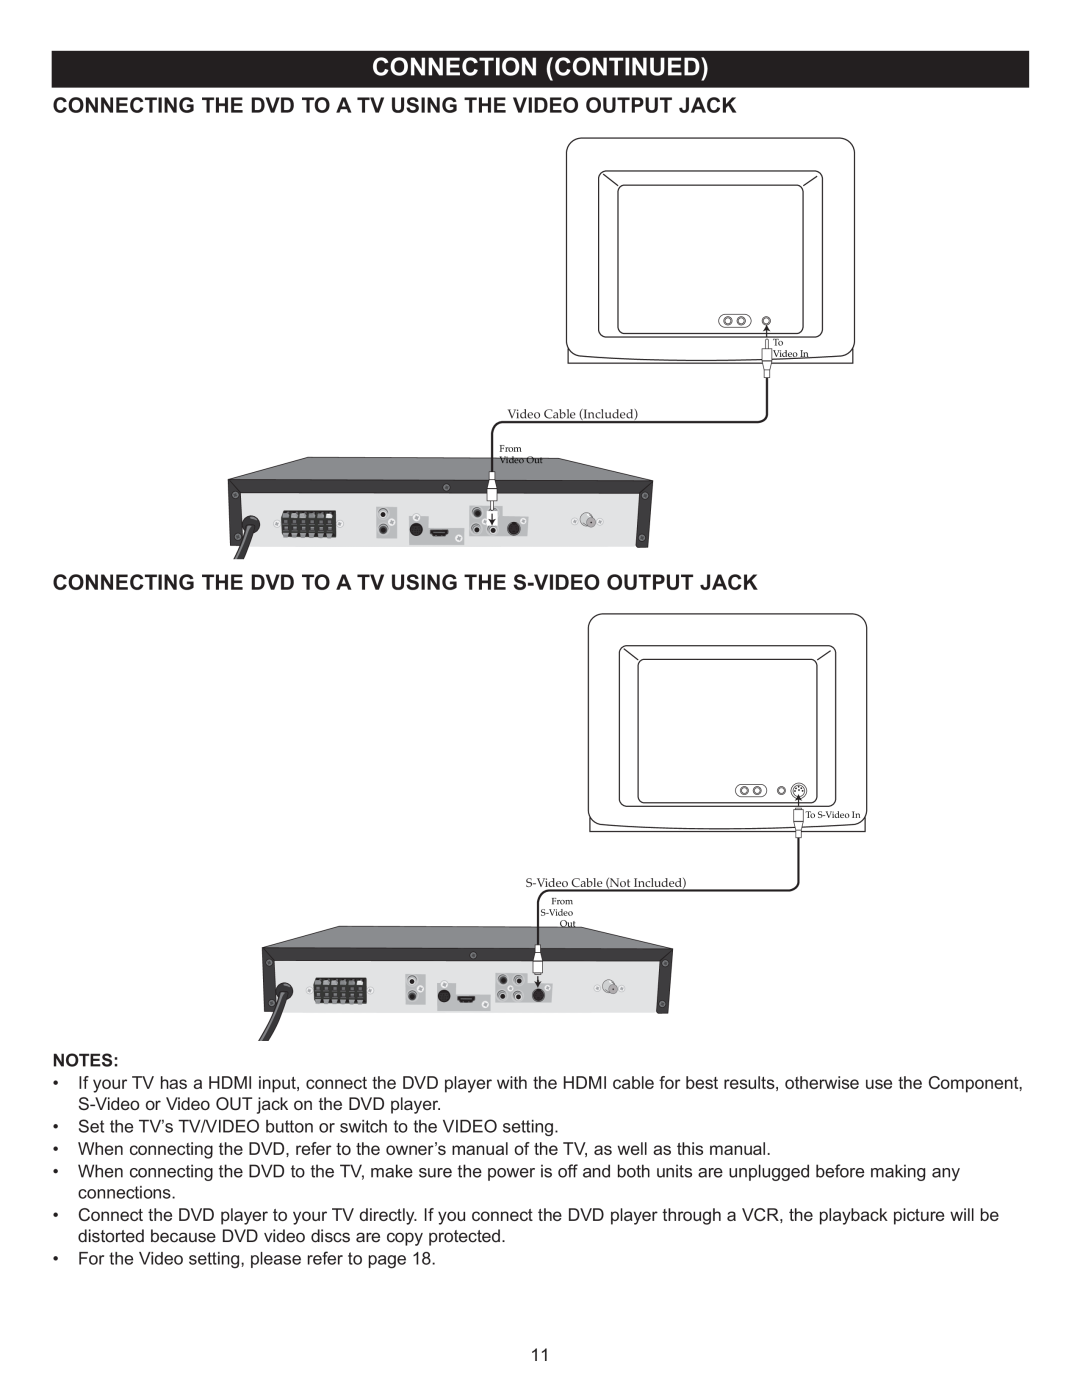 Memorex MIHT5005 manual • For the Video setting, please refer to page 